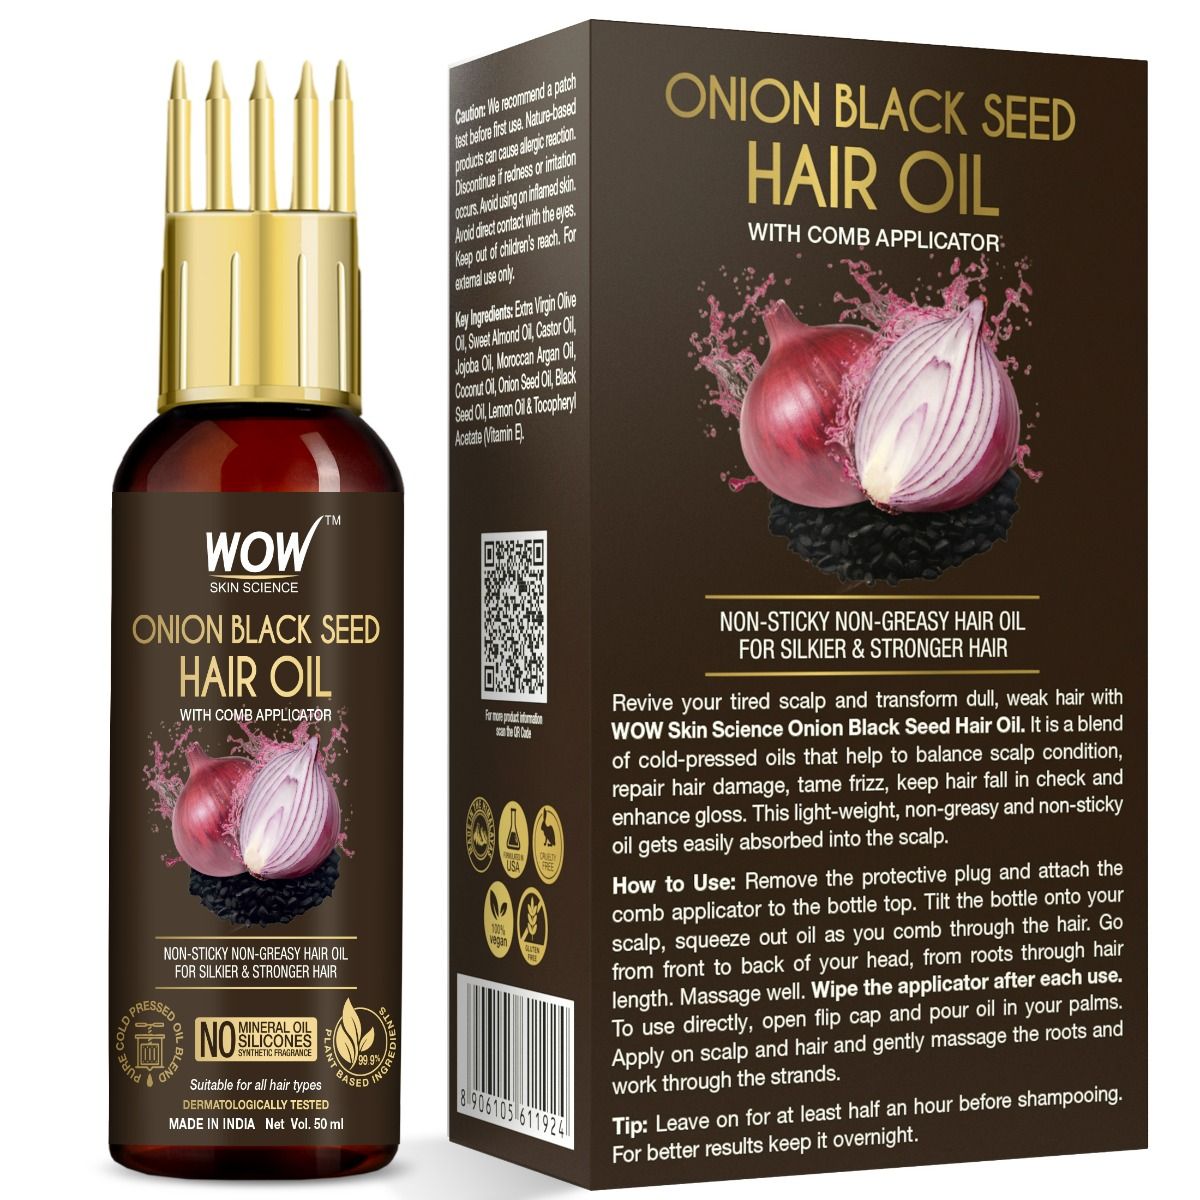 Wow Skin Science Onion Black Seed Hair Oil, 50 ml Price, Uses, Side  Effects, Composition - Apollo Pharmacy